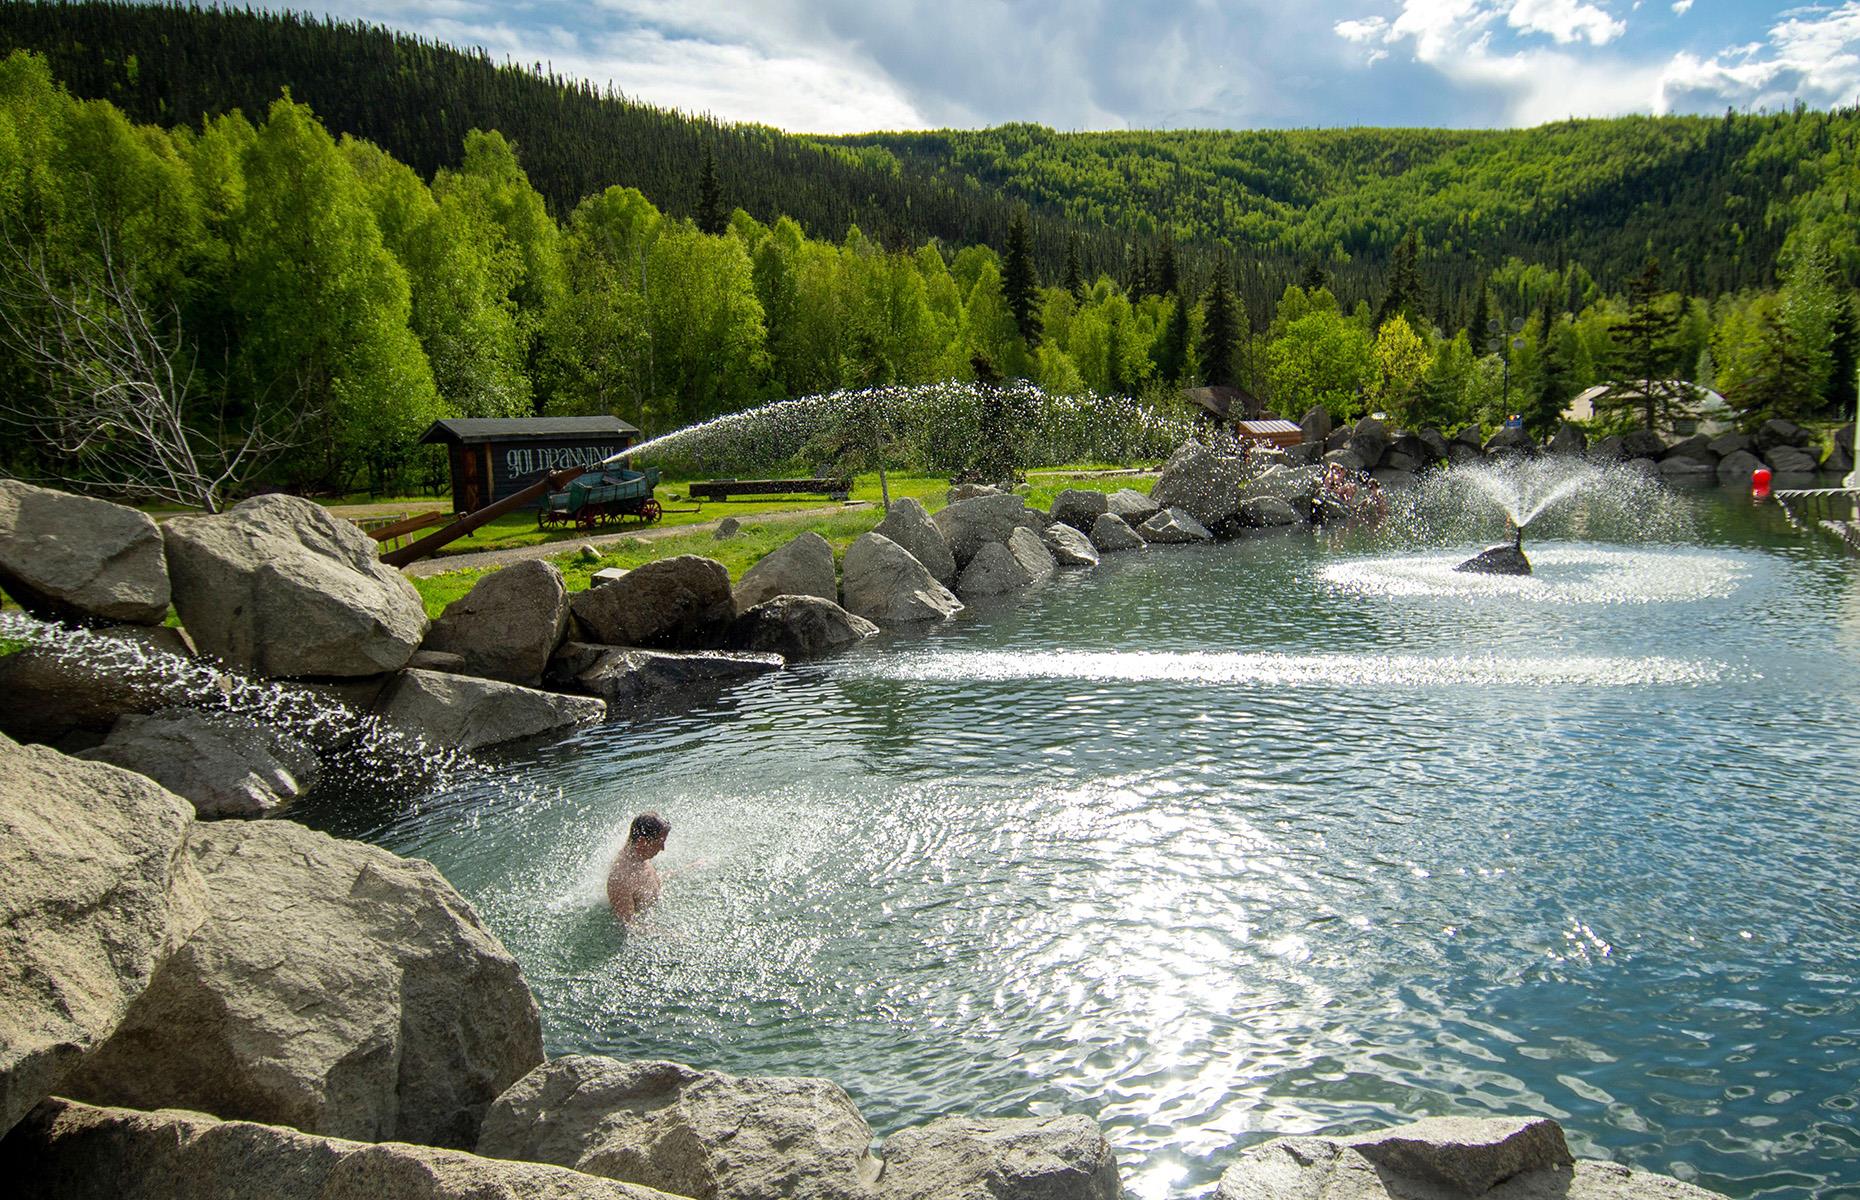 <p>The Chena Hot Springs were discovered in 1905, when a pair of gold mining brothers struck a little more than they bargained for. The beautiful boulder-encircled lake boasts 41°C waters (106°F), and, for lucky guests who visit at the right time of year, an occasional glimpse of the Northern Lights. Situated roughly 60 miles (97km) from Fairbanks, Alaska, the springs are now part of a luxurious resort, the area’s main attraction.</p>